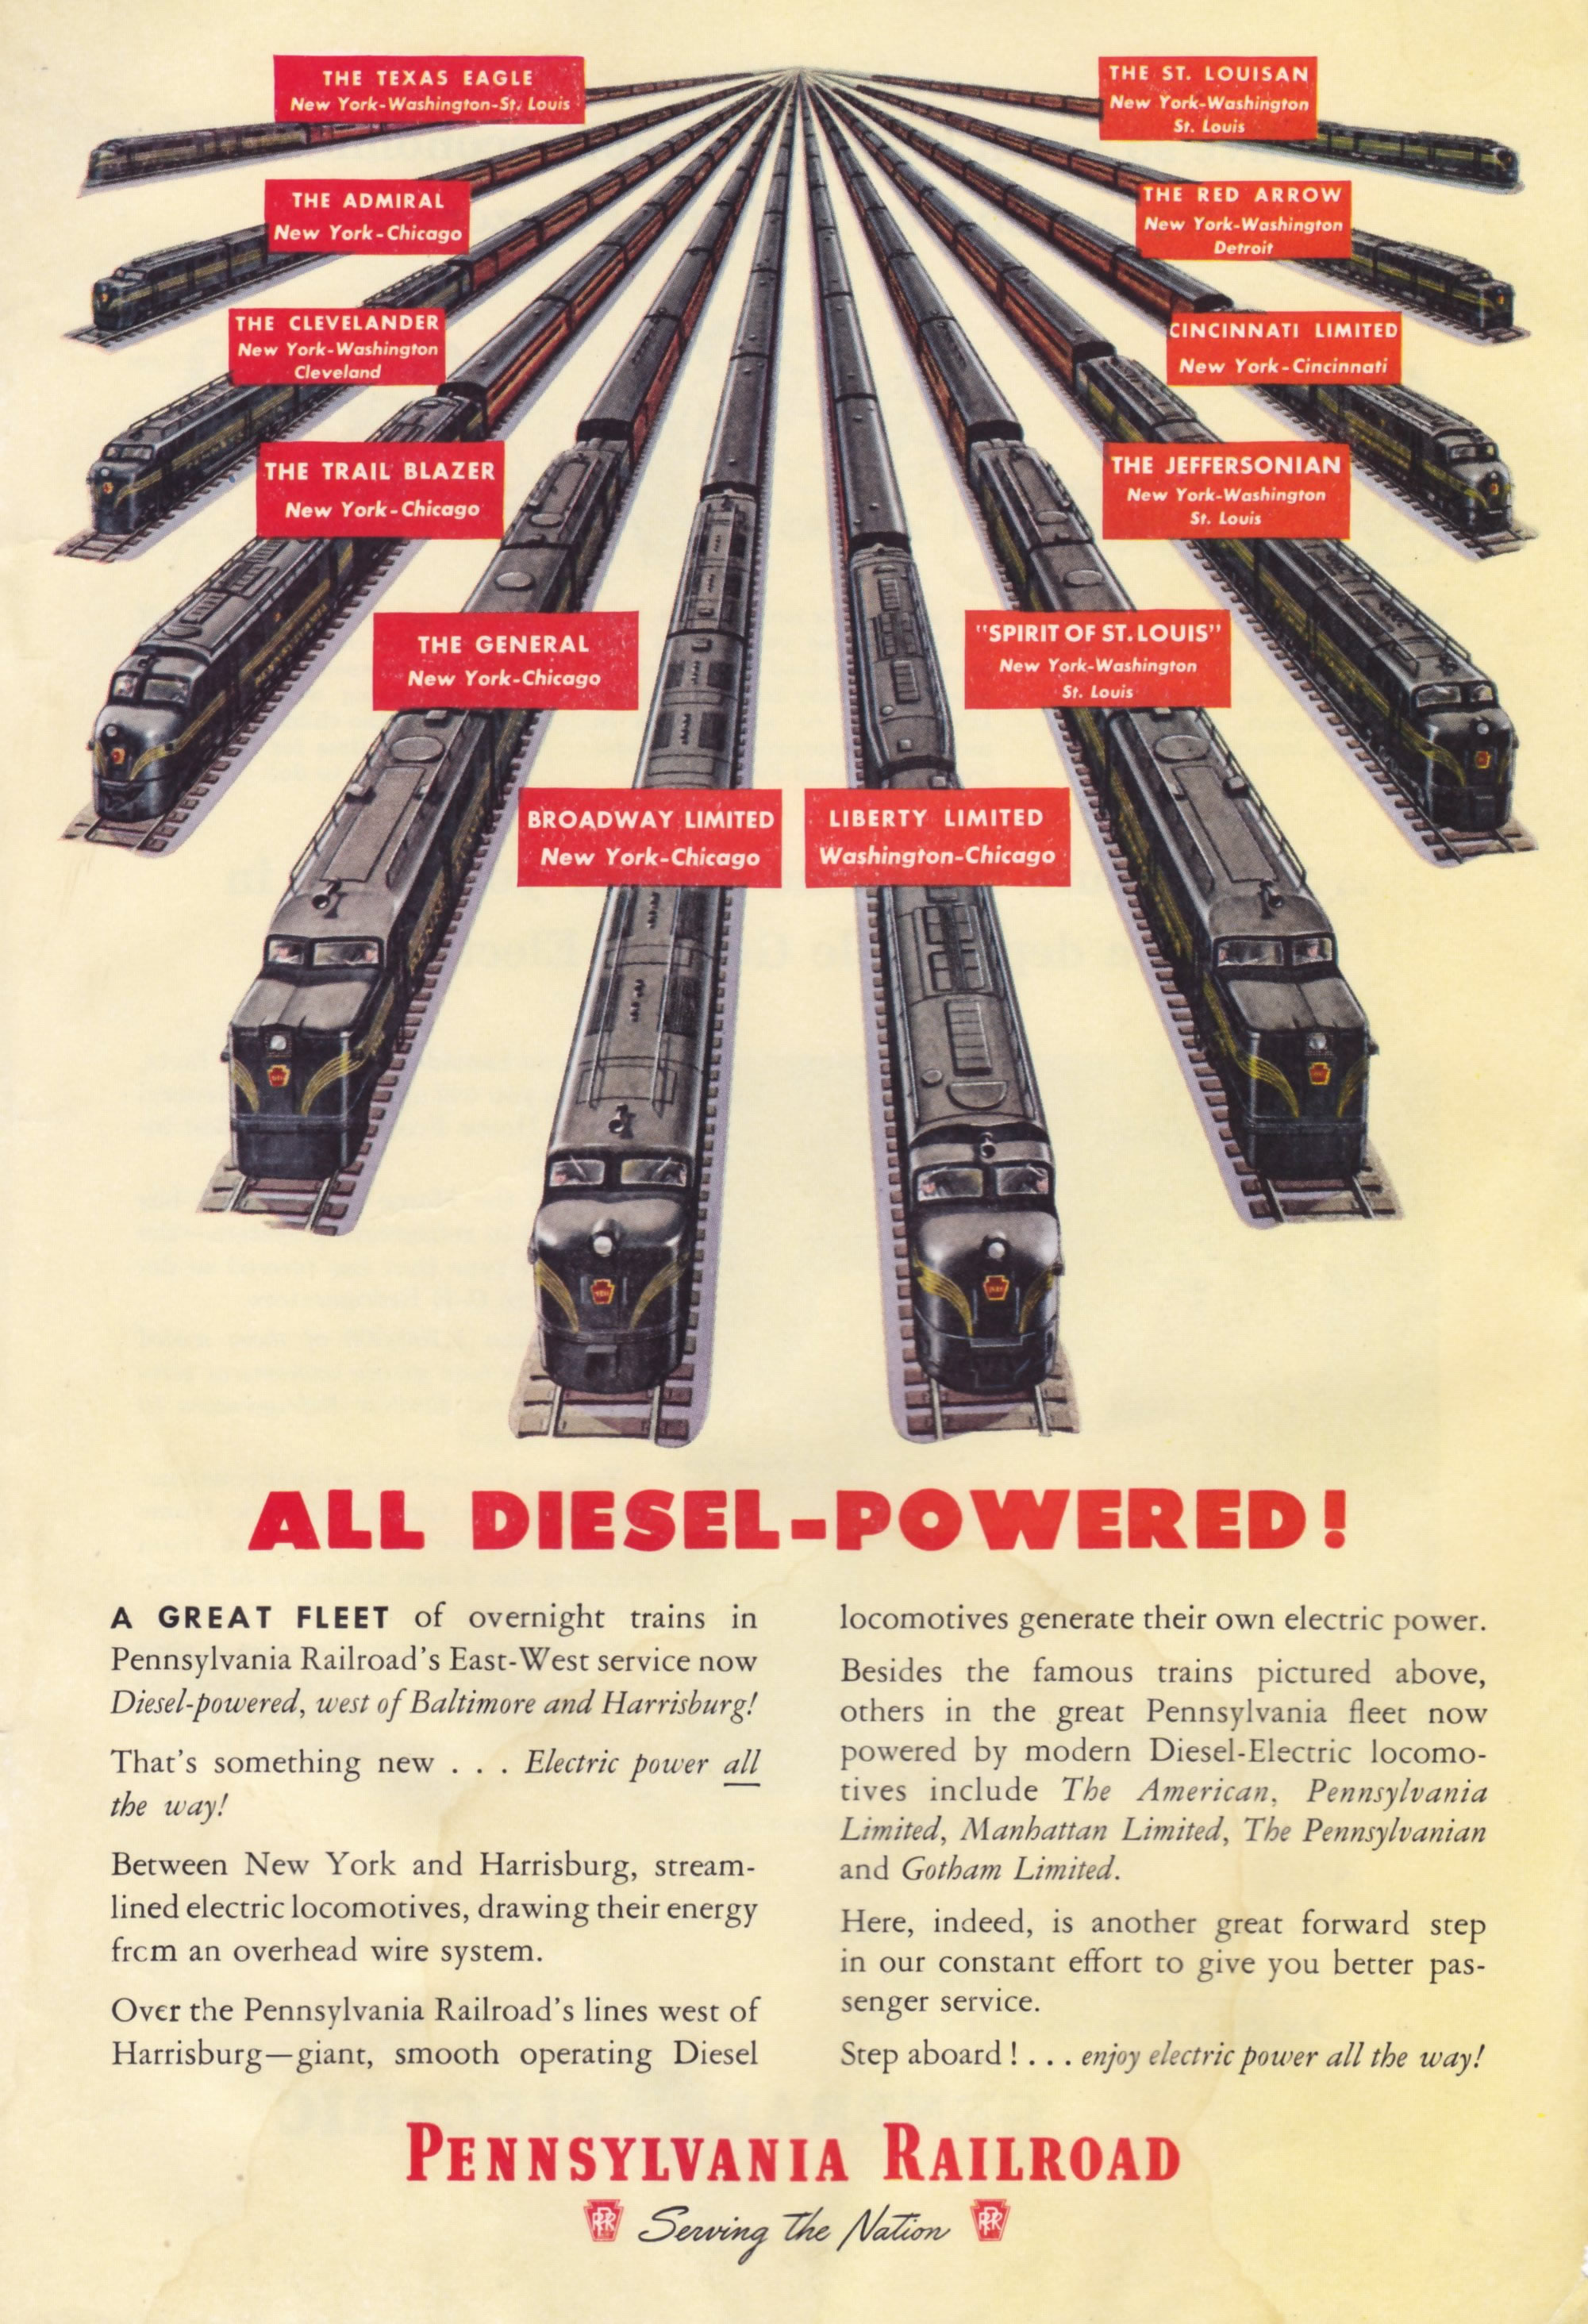 PA Railroad ad for its diesel engines